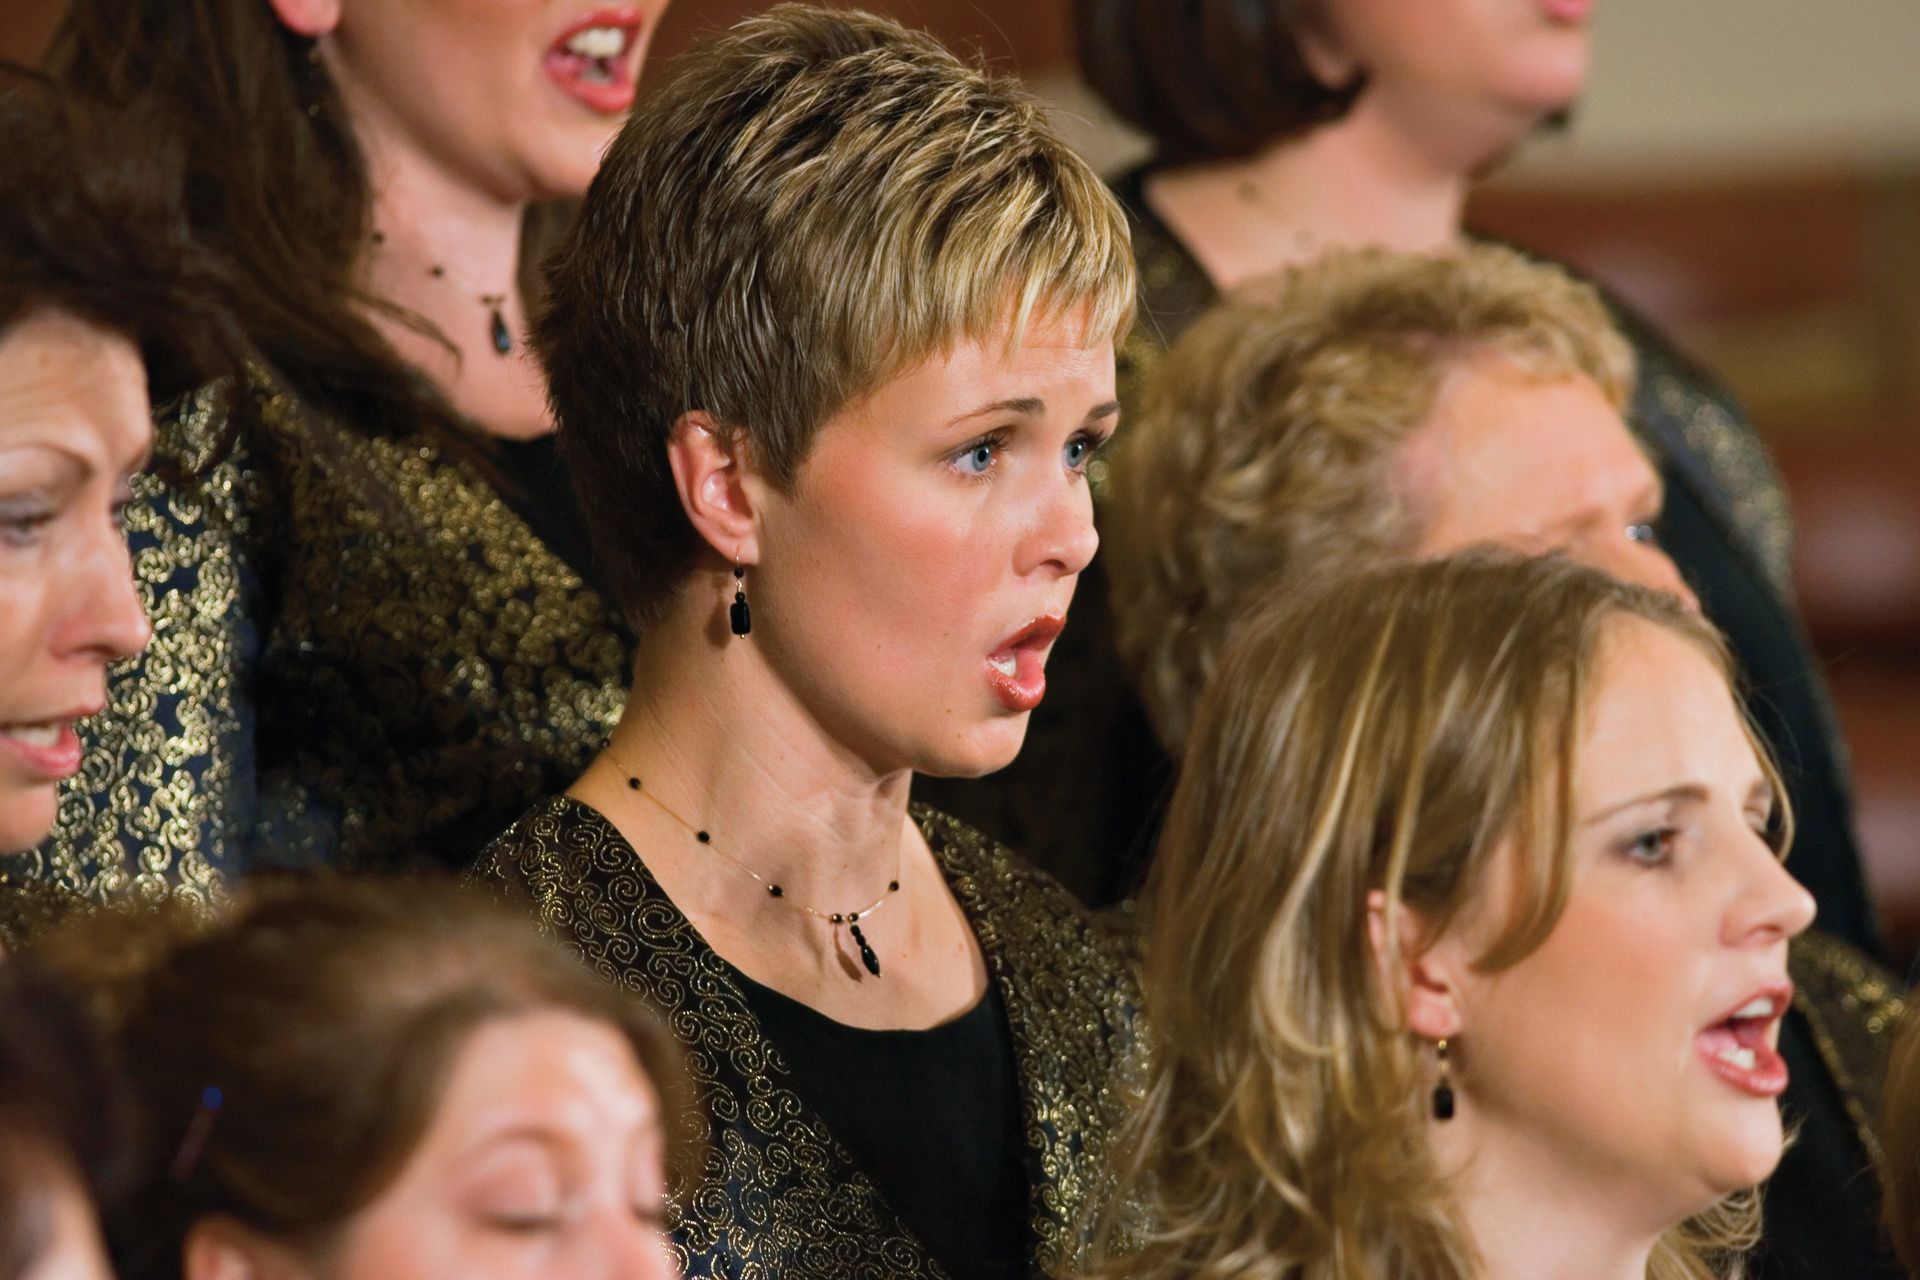 A group of women standing and singing in a women’s choir.